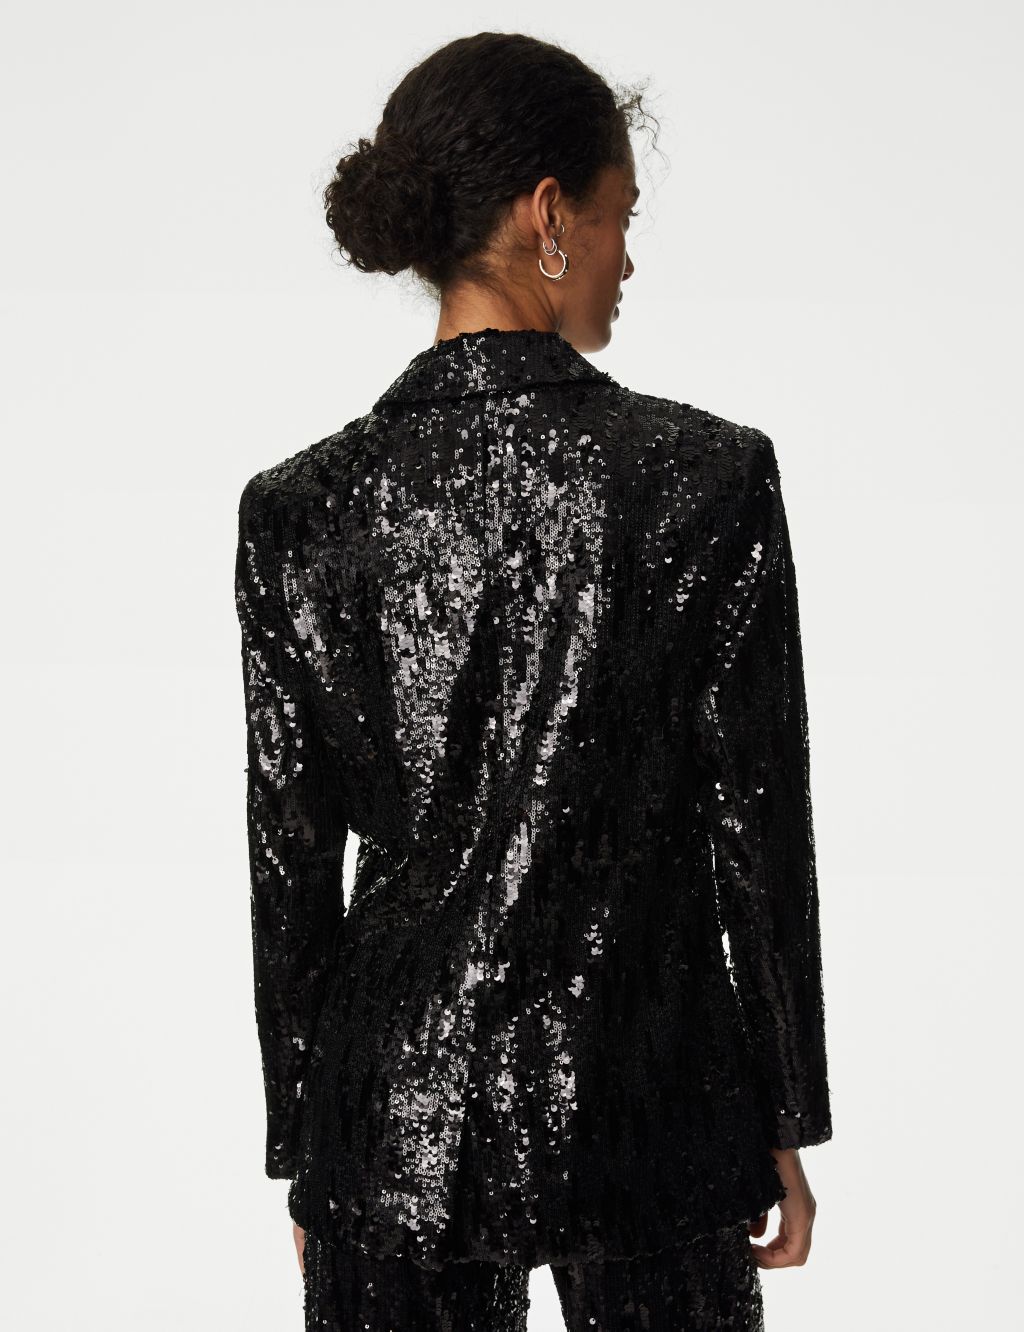 Tailored Sequin Single Breasted Blazer image 6